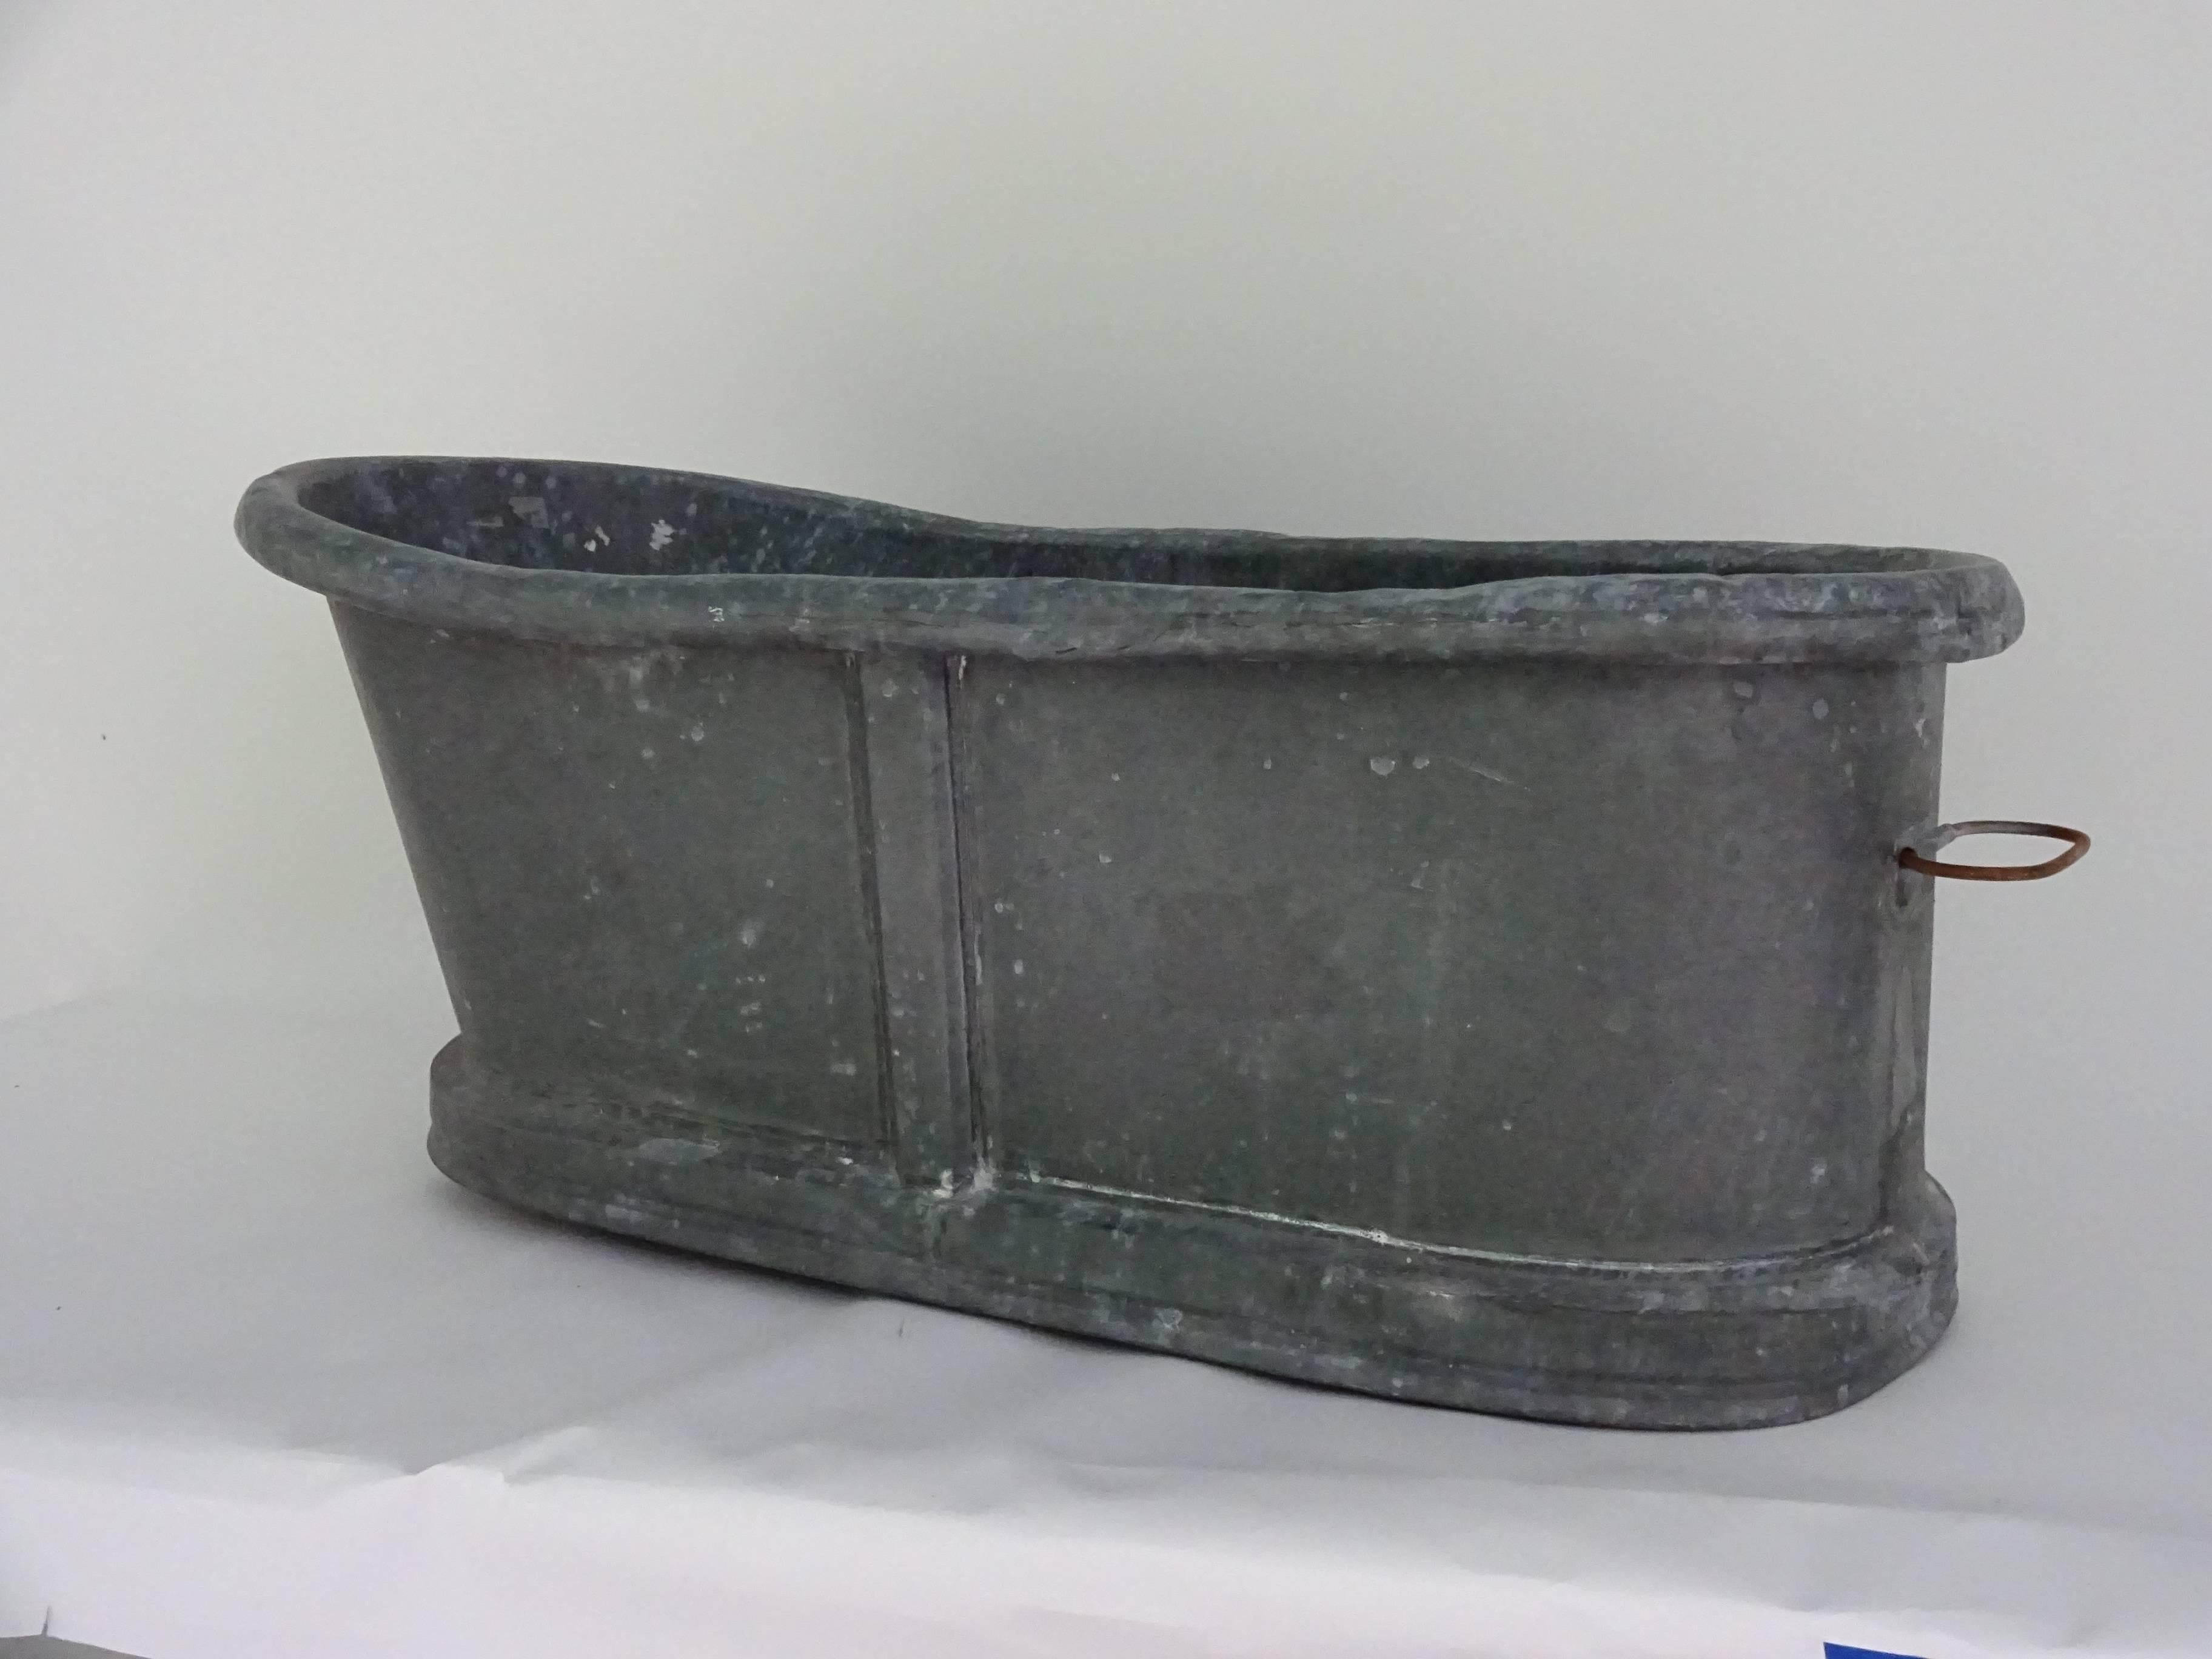 19th century zinc baby bathtub. English or American. Handles at either end. Good as a planter and also makes a wonderful ice bucket for a large party or reception. Fill it with ice and champagne. Zinc and wood.